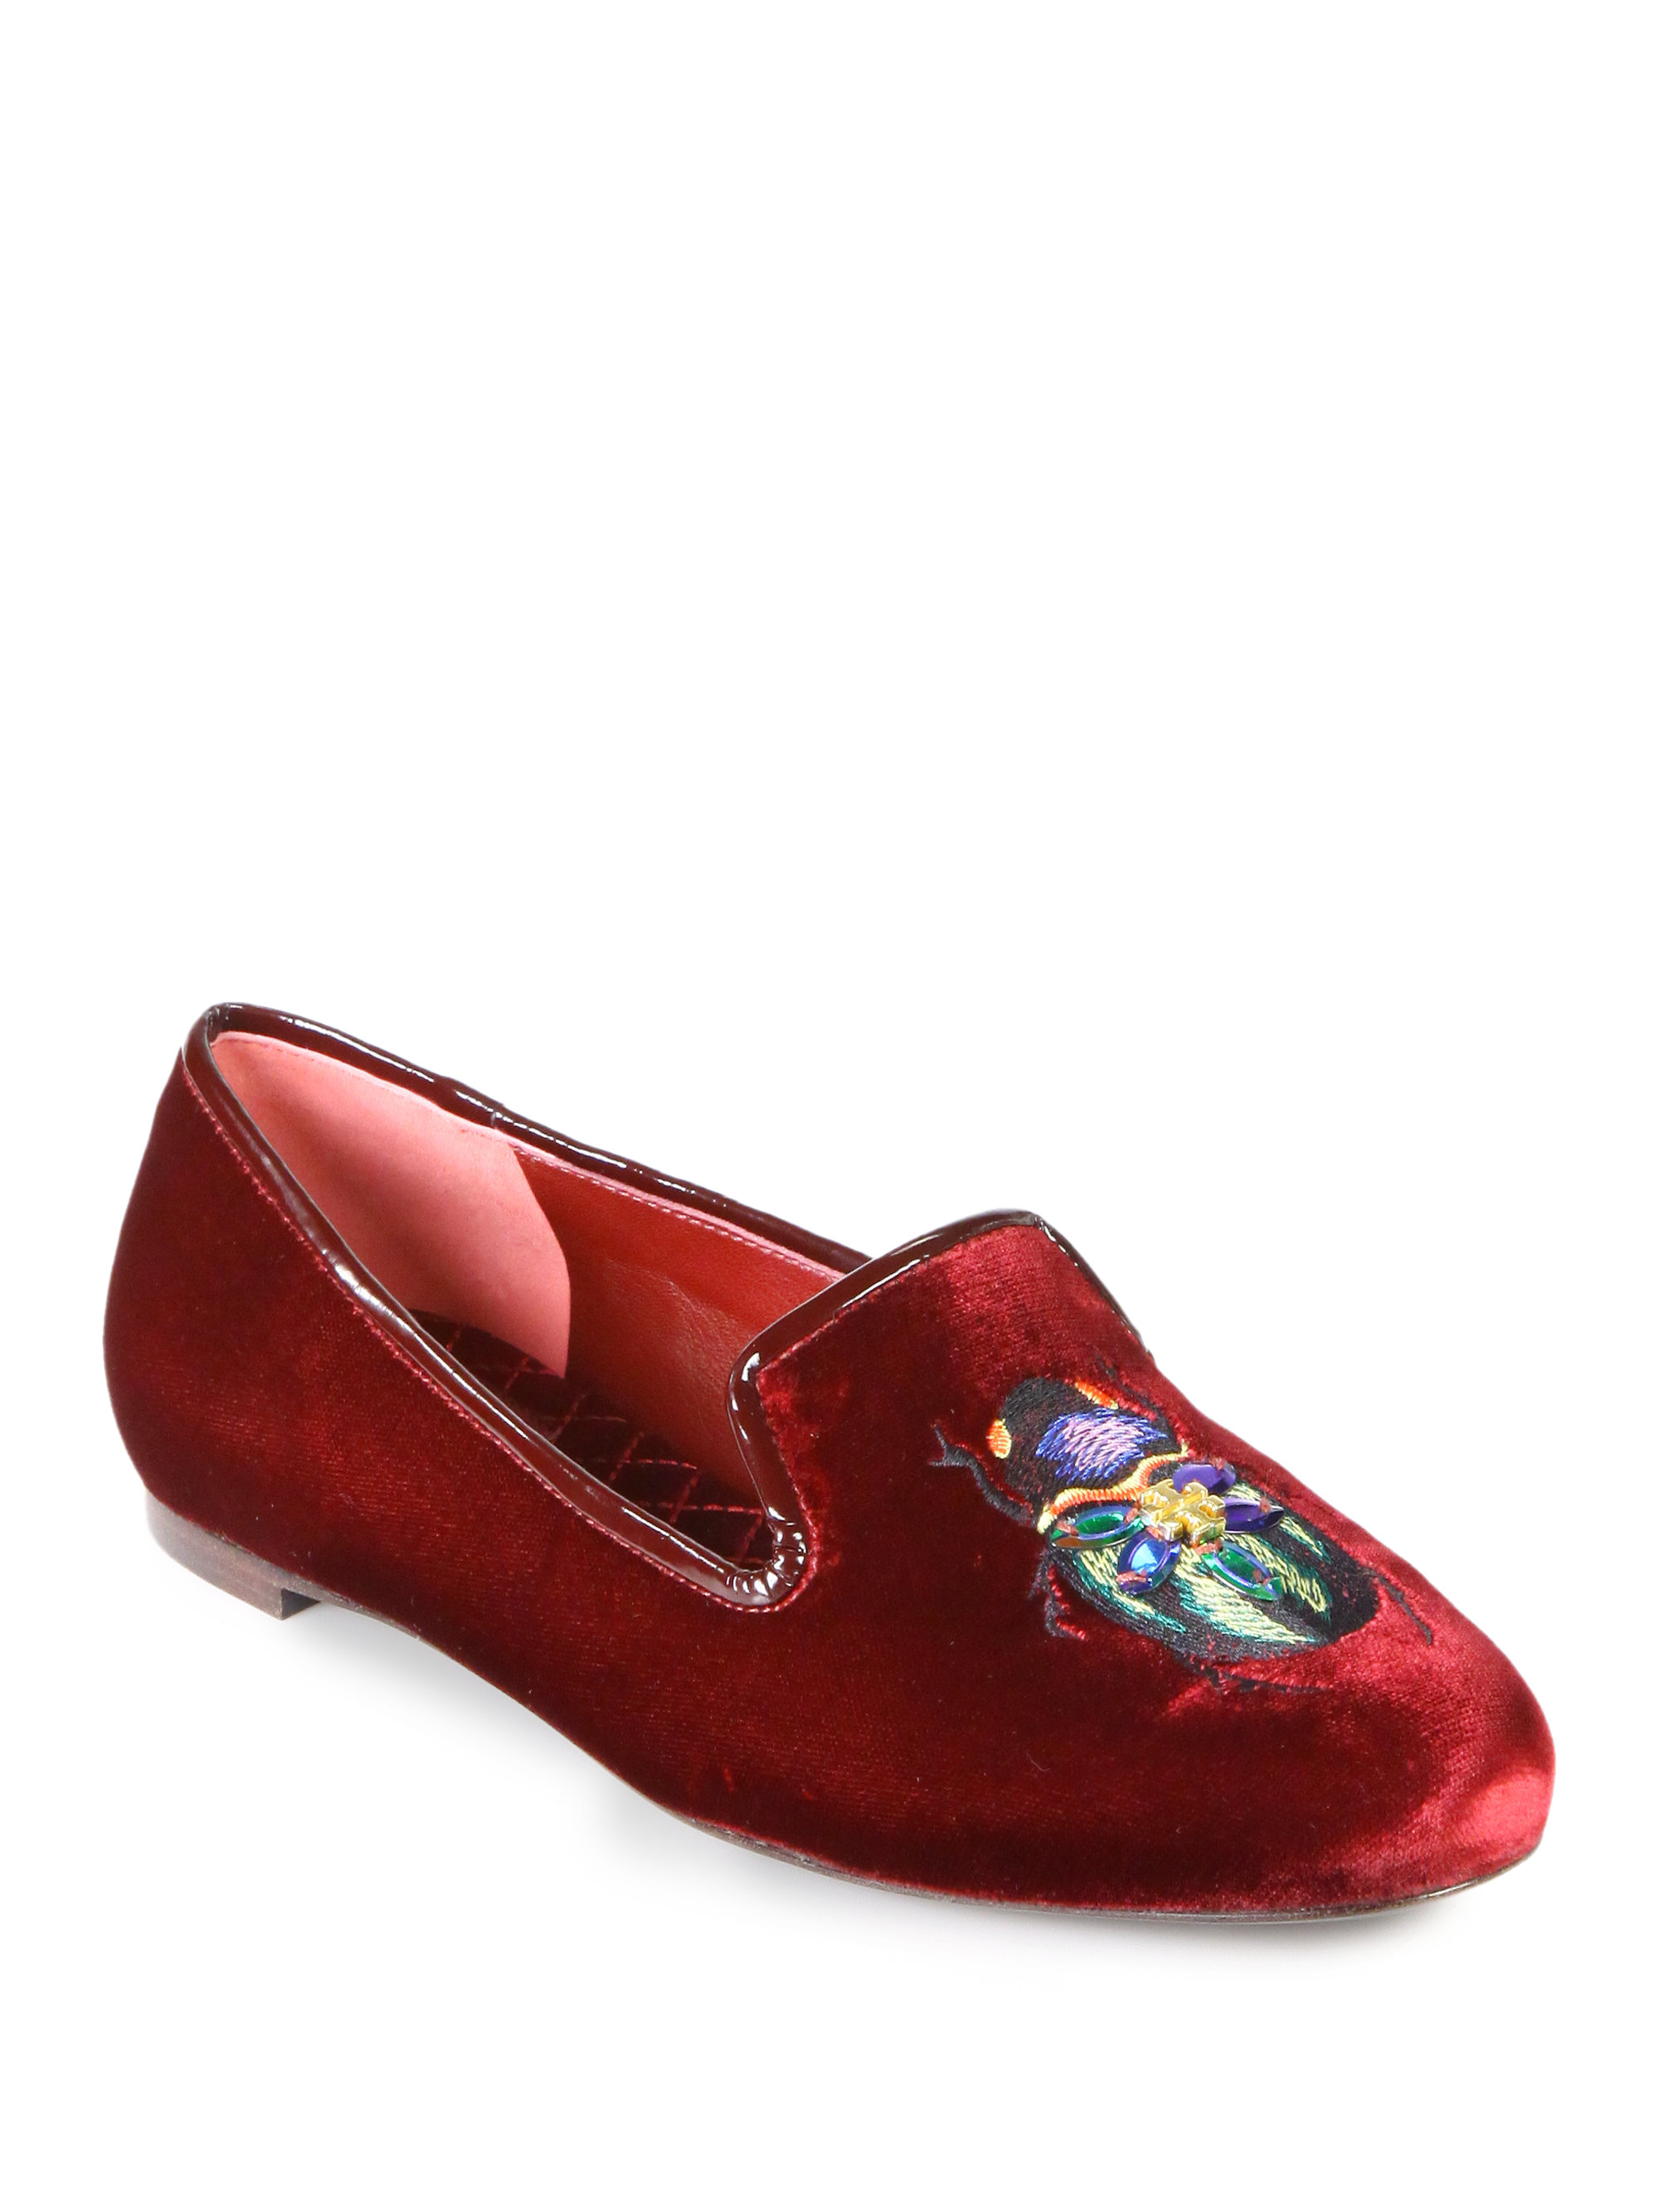 Lyst - Tory Burch Easton Velvet Patent Leather Smoking Slippers in Red